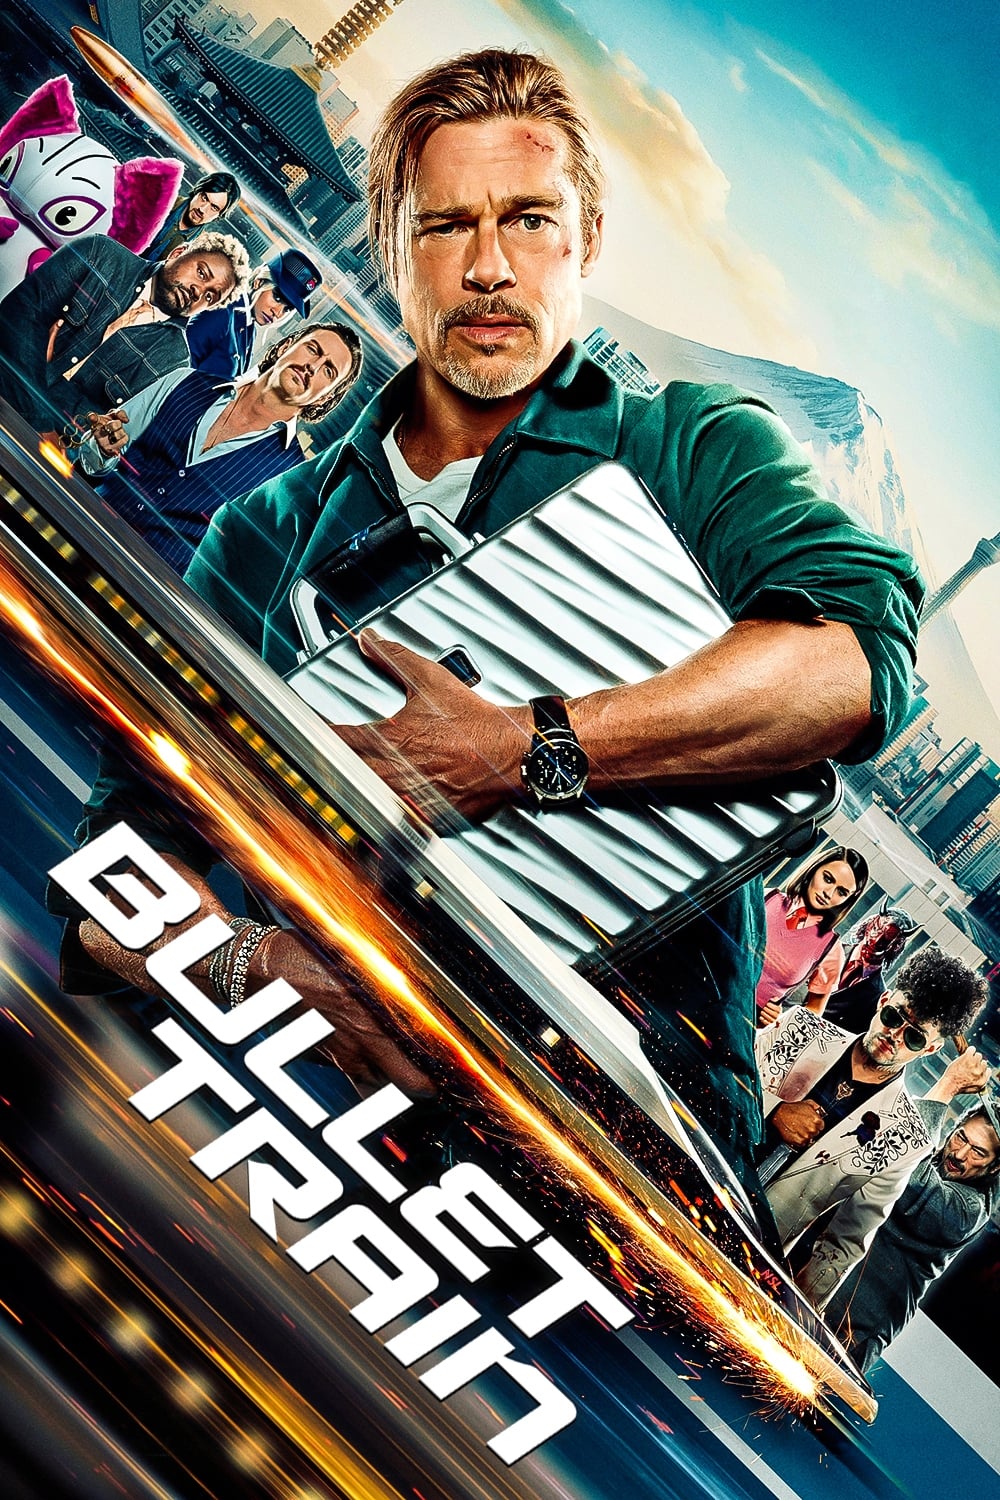 Poster for the movie "Bullet Train"